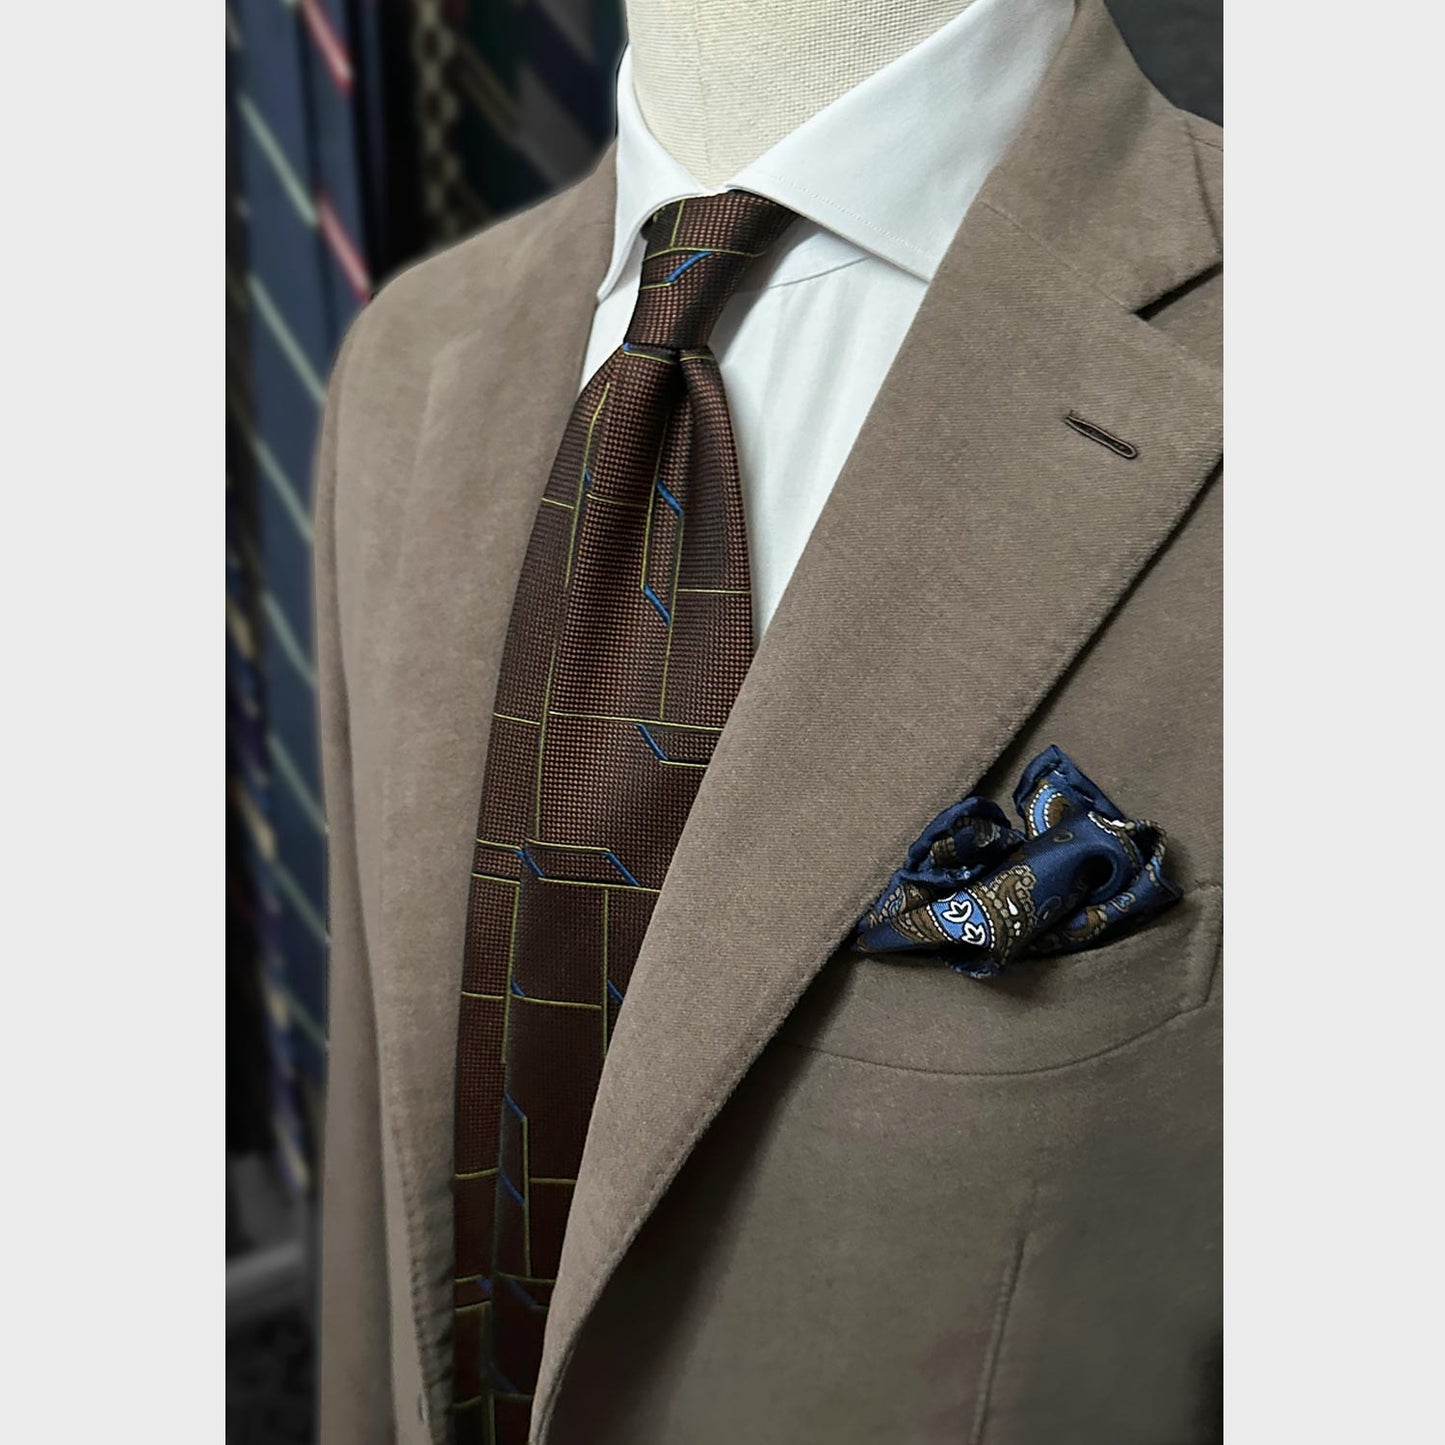 Handmade tie with original 3D geometric pattern, made with soft partridge eye silk, unlined hand rolled edge 3 folds, coffee brown background. F.Marino Napoli exclusive handmade in Italy tie for Wools Boutique Uomo